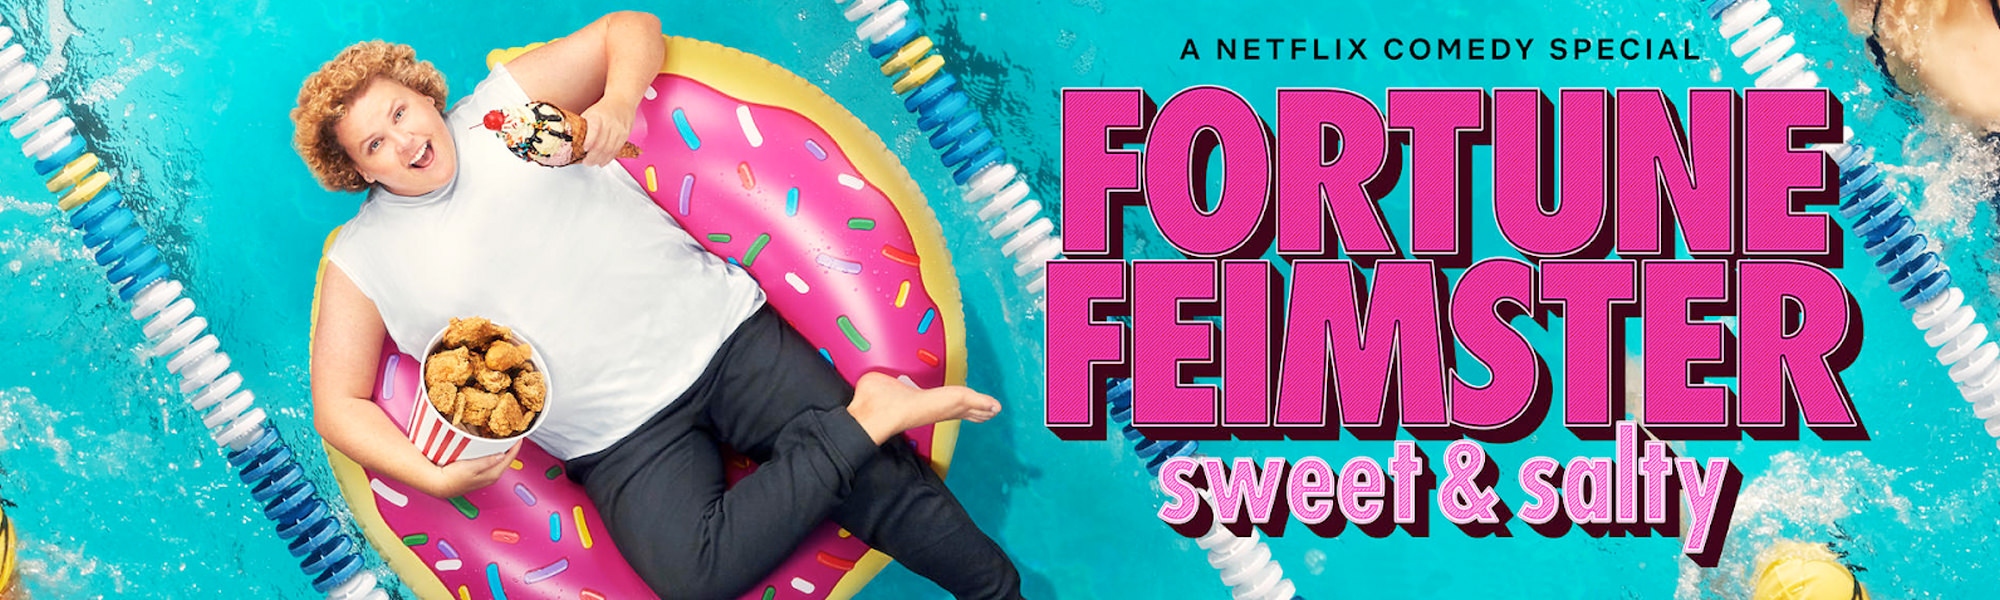 Comedian Fortune Feimster laying in a large inflatable donut floating in a swimming pool. The words Fortune Feimster Sweet and Salty, a Netflix Comedy Special appear in pink.